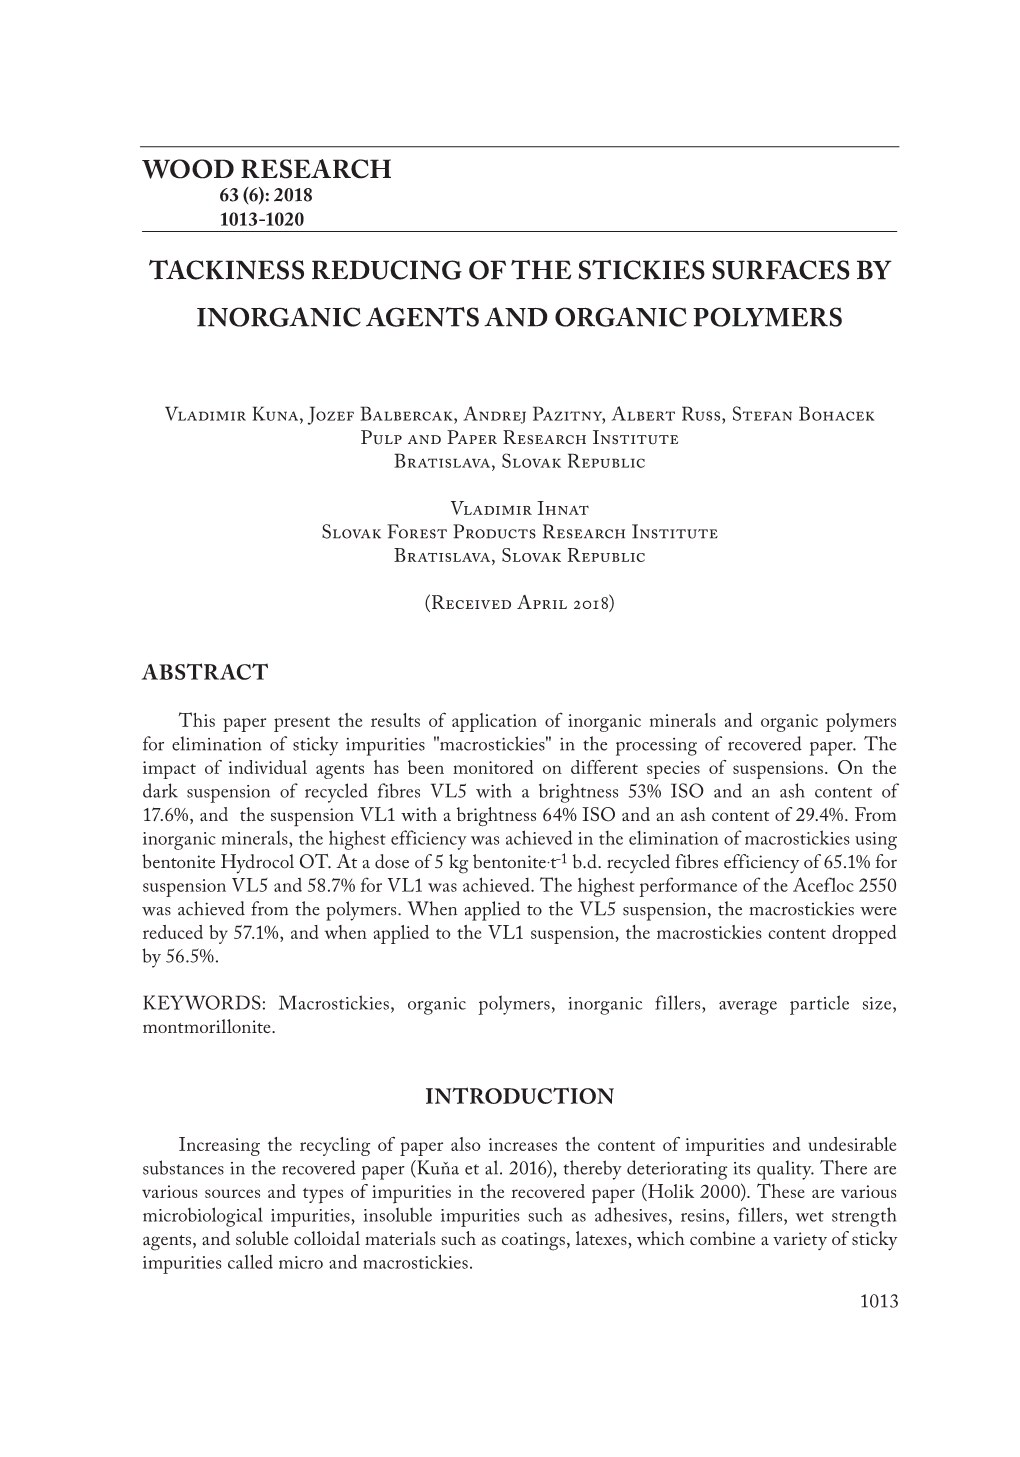 Tackiness Reducing of the Stickies Surfaces by Inorganic Agents and Organic Polymers